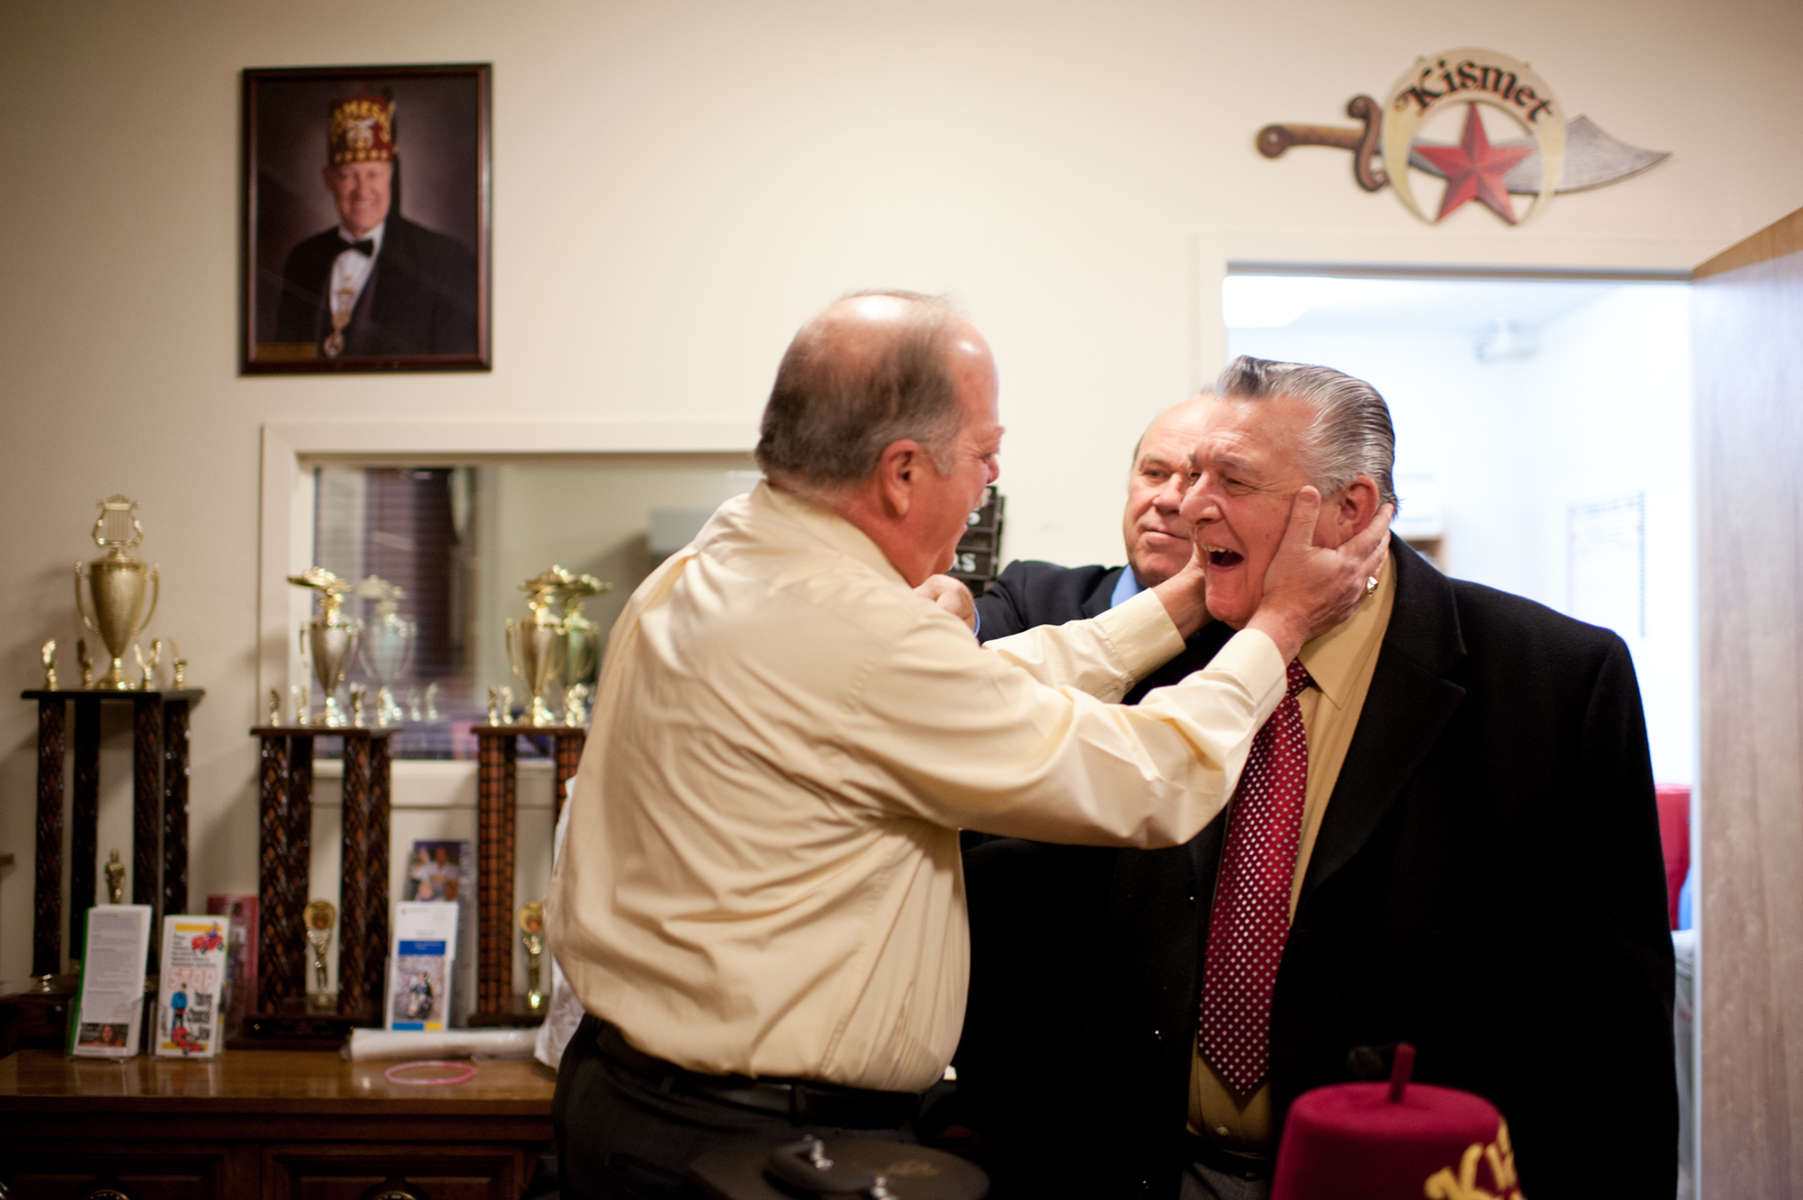 Noble Michael Finocchio, 65, of North Patchogue greets friend and Shriner brother Noble Joe Rizzo, 71, of Sayville, before a meeting of the Kismet Shriners in Hicksville. (Mar. 5, 2012) (Photo by Nancy Borowick)